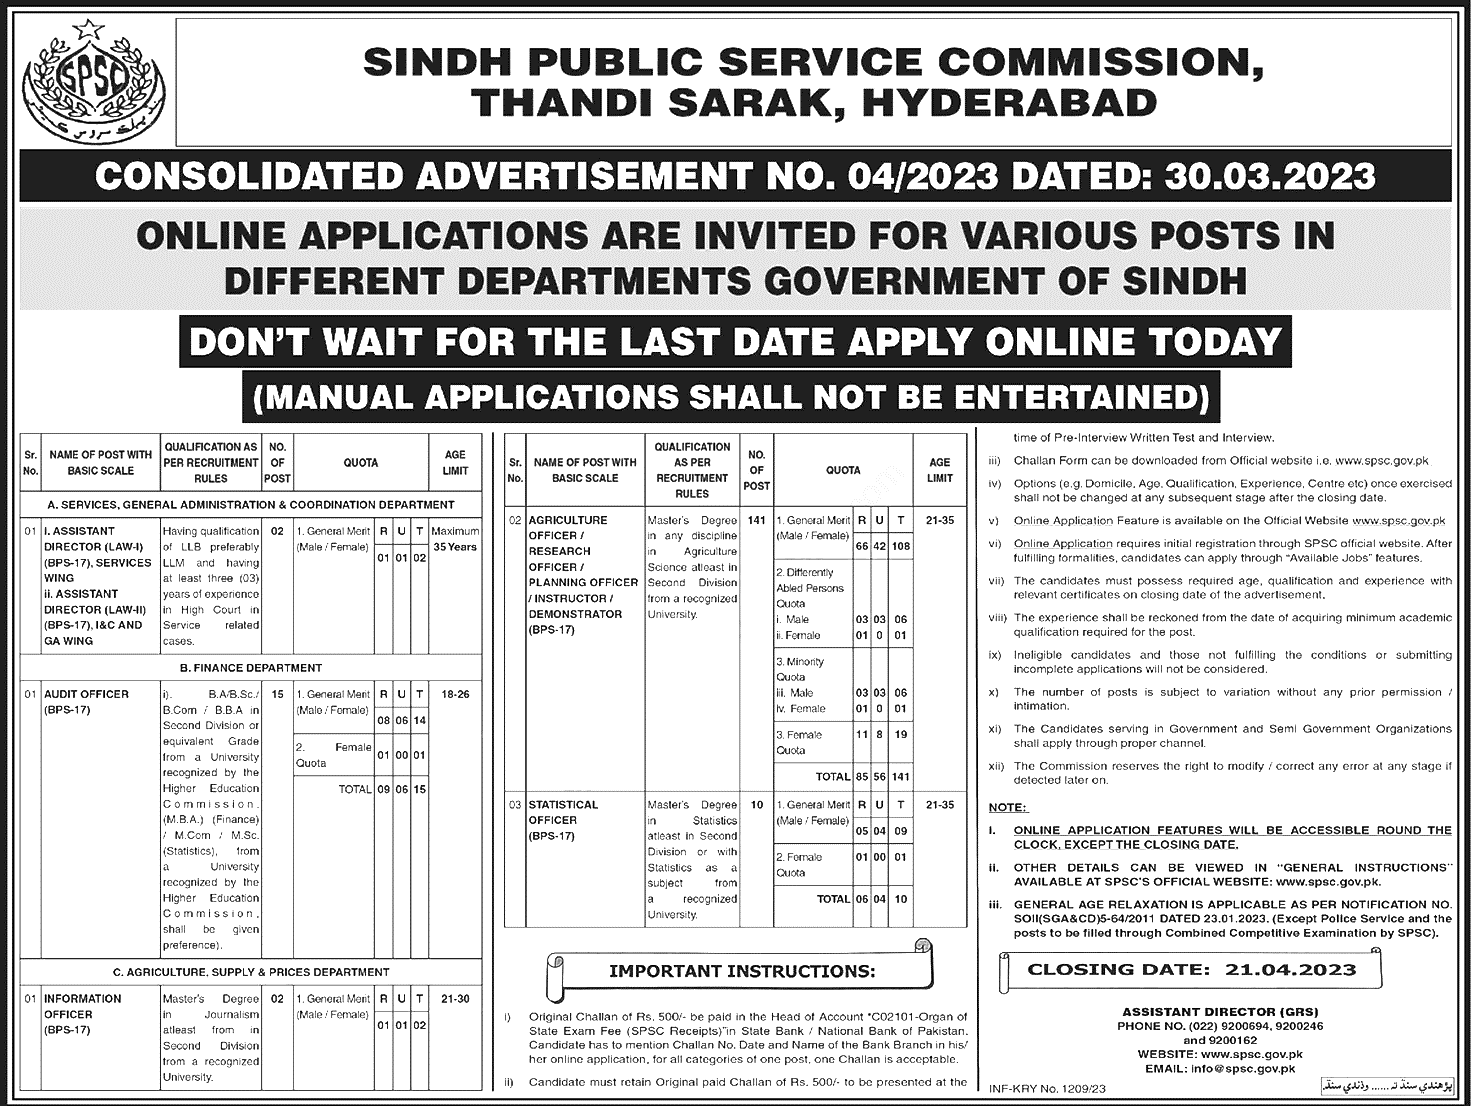 SPSC Jobs March 2023 April Apply Online Consolidated Advertisement No 04/2023 4/2023